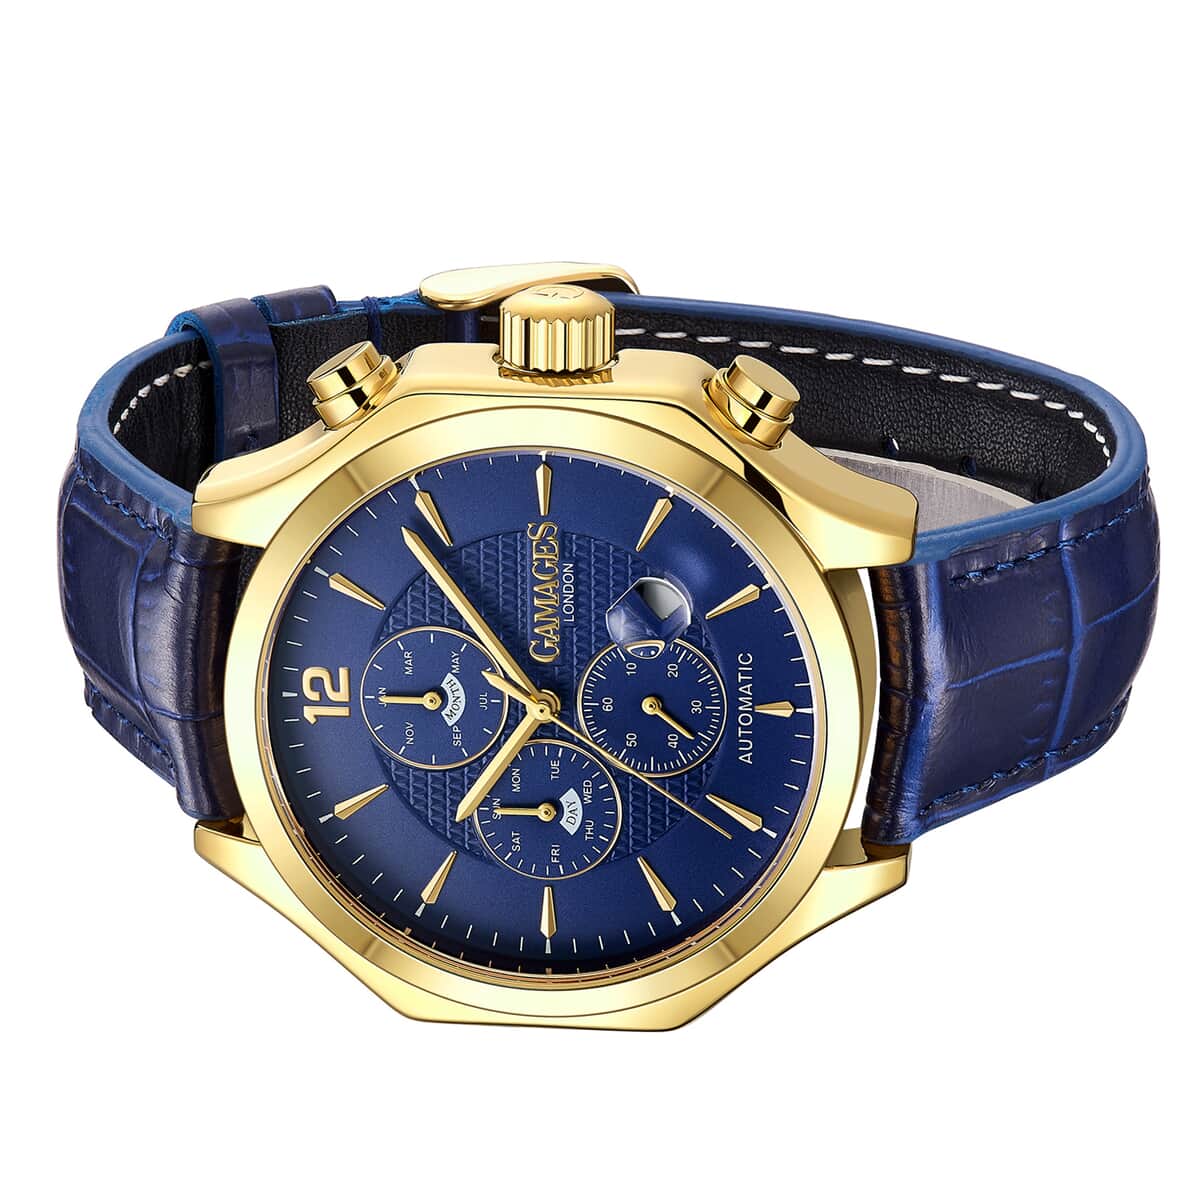 GAMAGES OF LONDON Limited Edition Hand Assembled Grandeur Automatic Movement Genuine Leather Strap Watch in Blue (45mm) FREE GIFT PEN image number 1